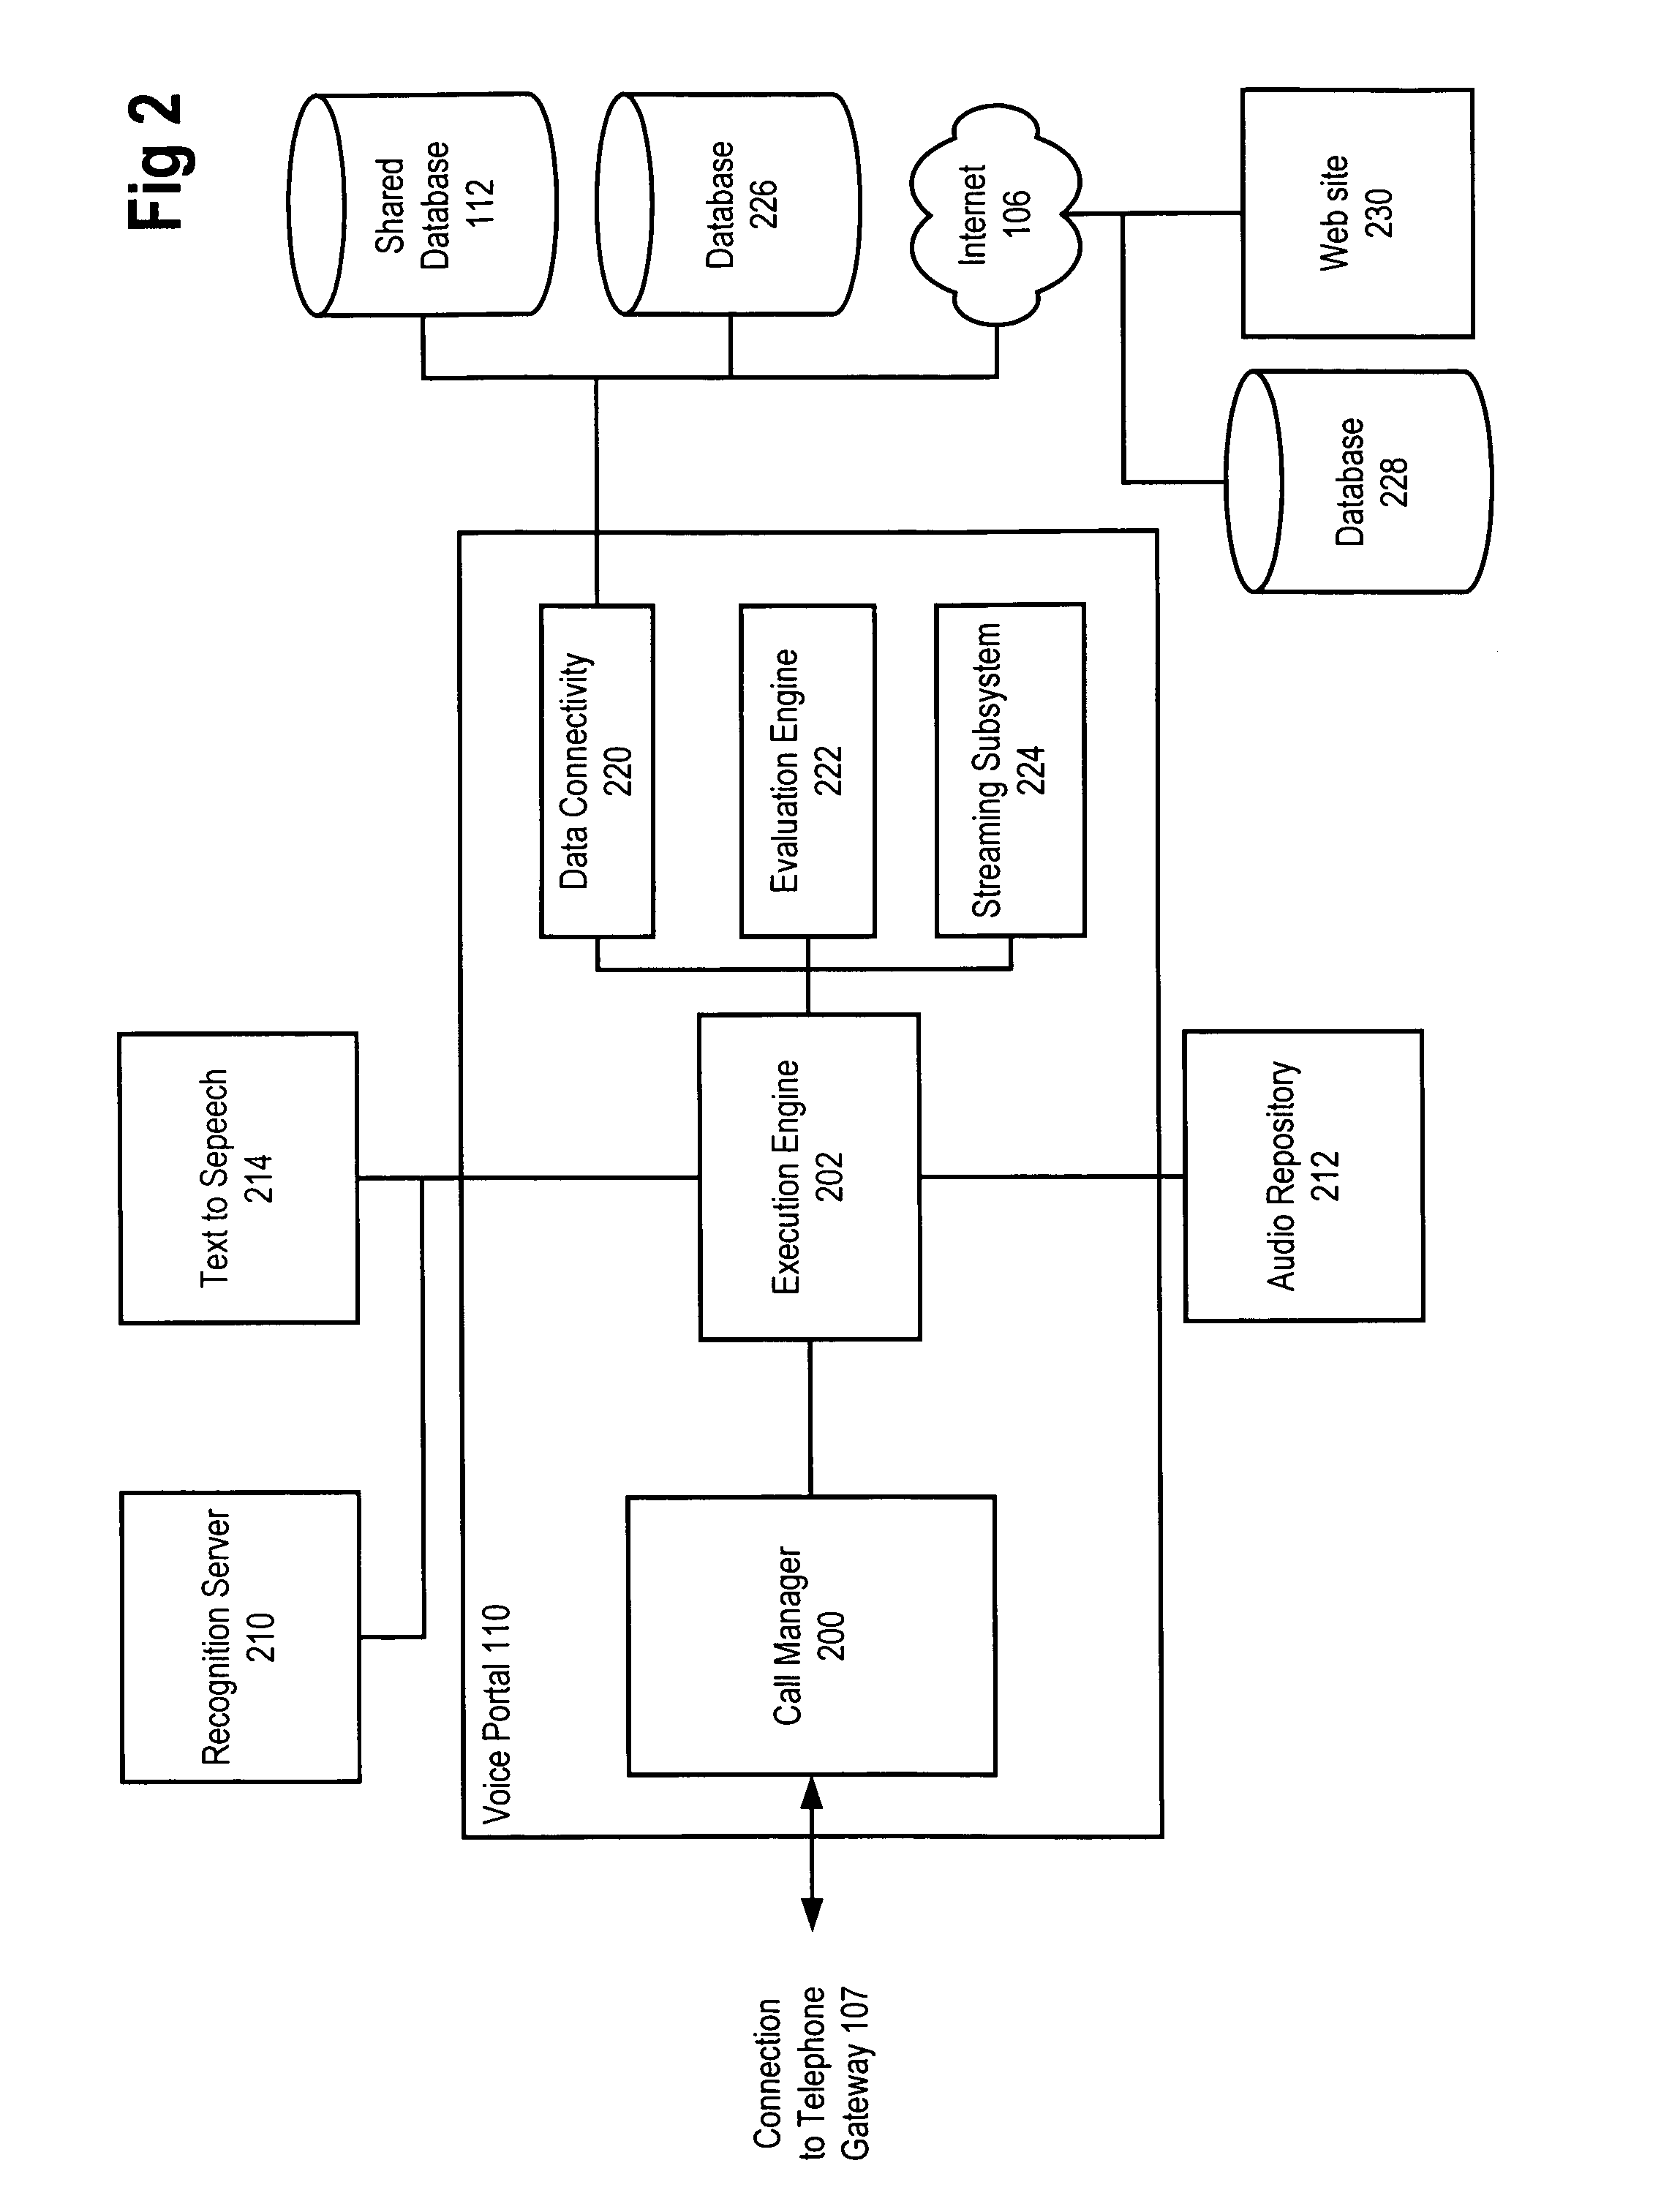 Method and apparatus for electronic commerce using a telephone interface